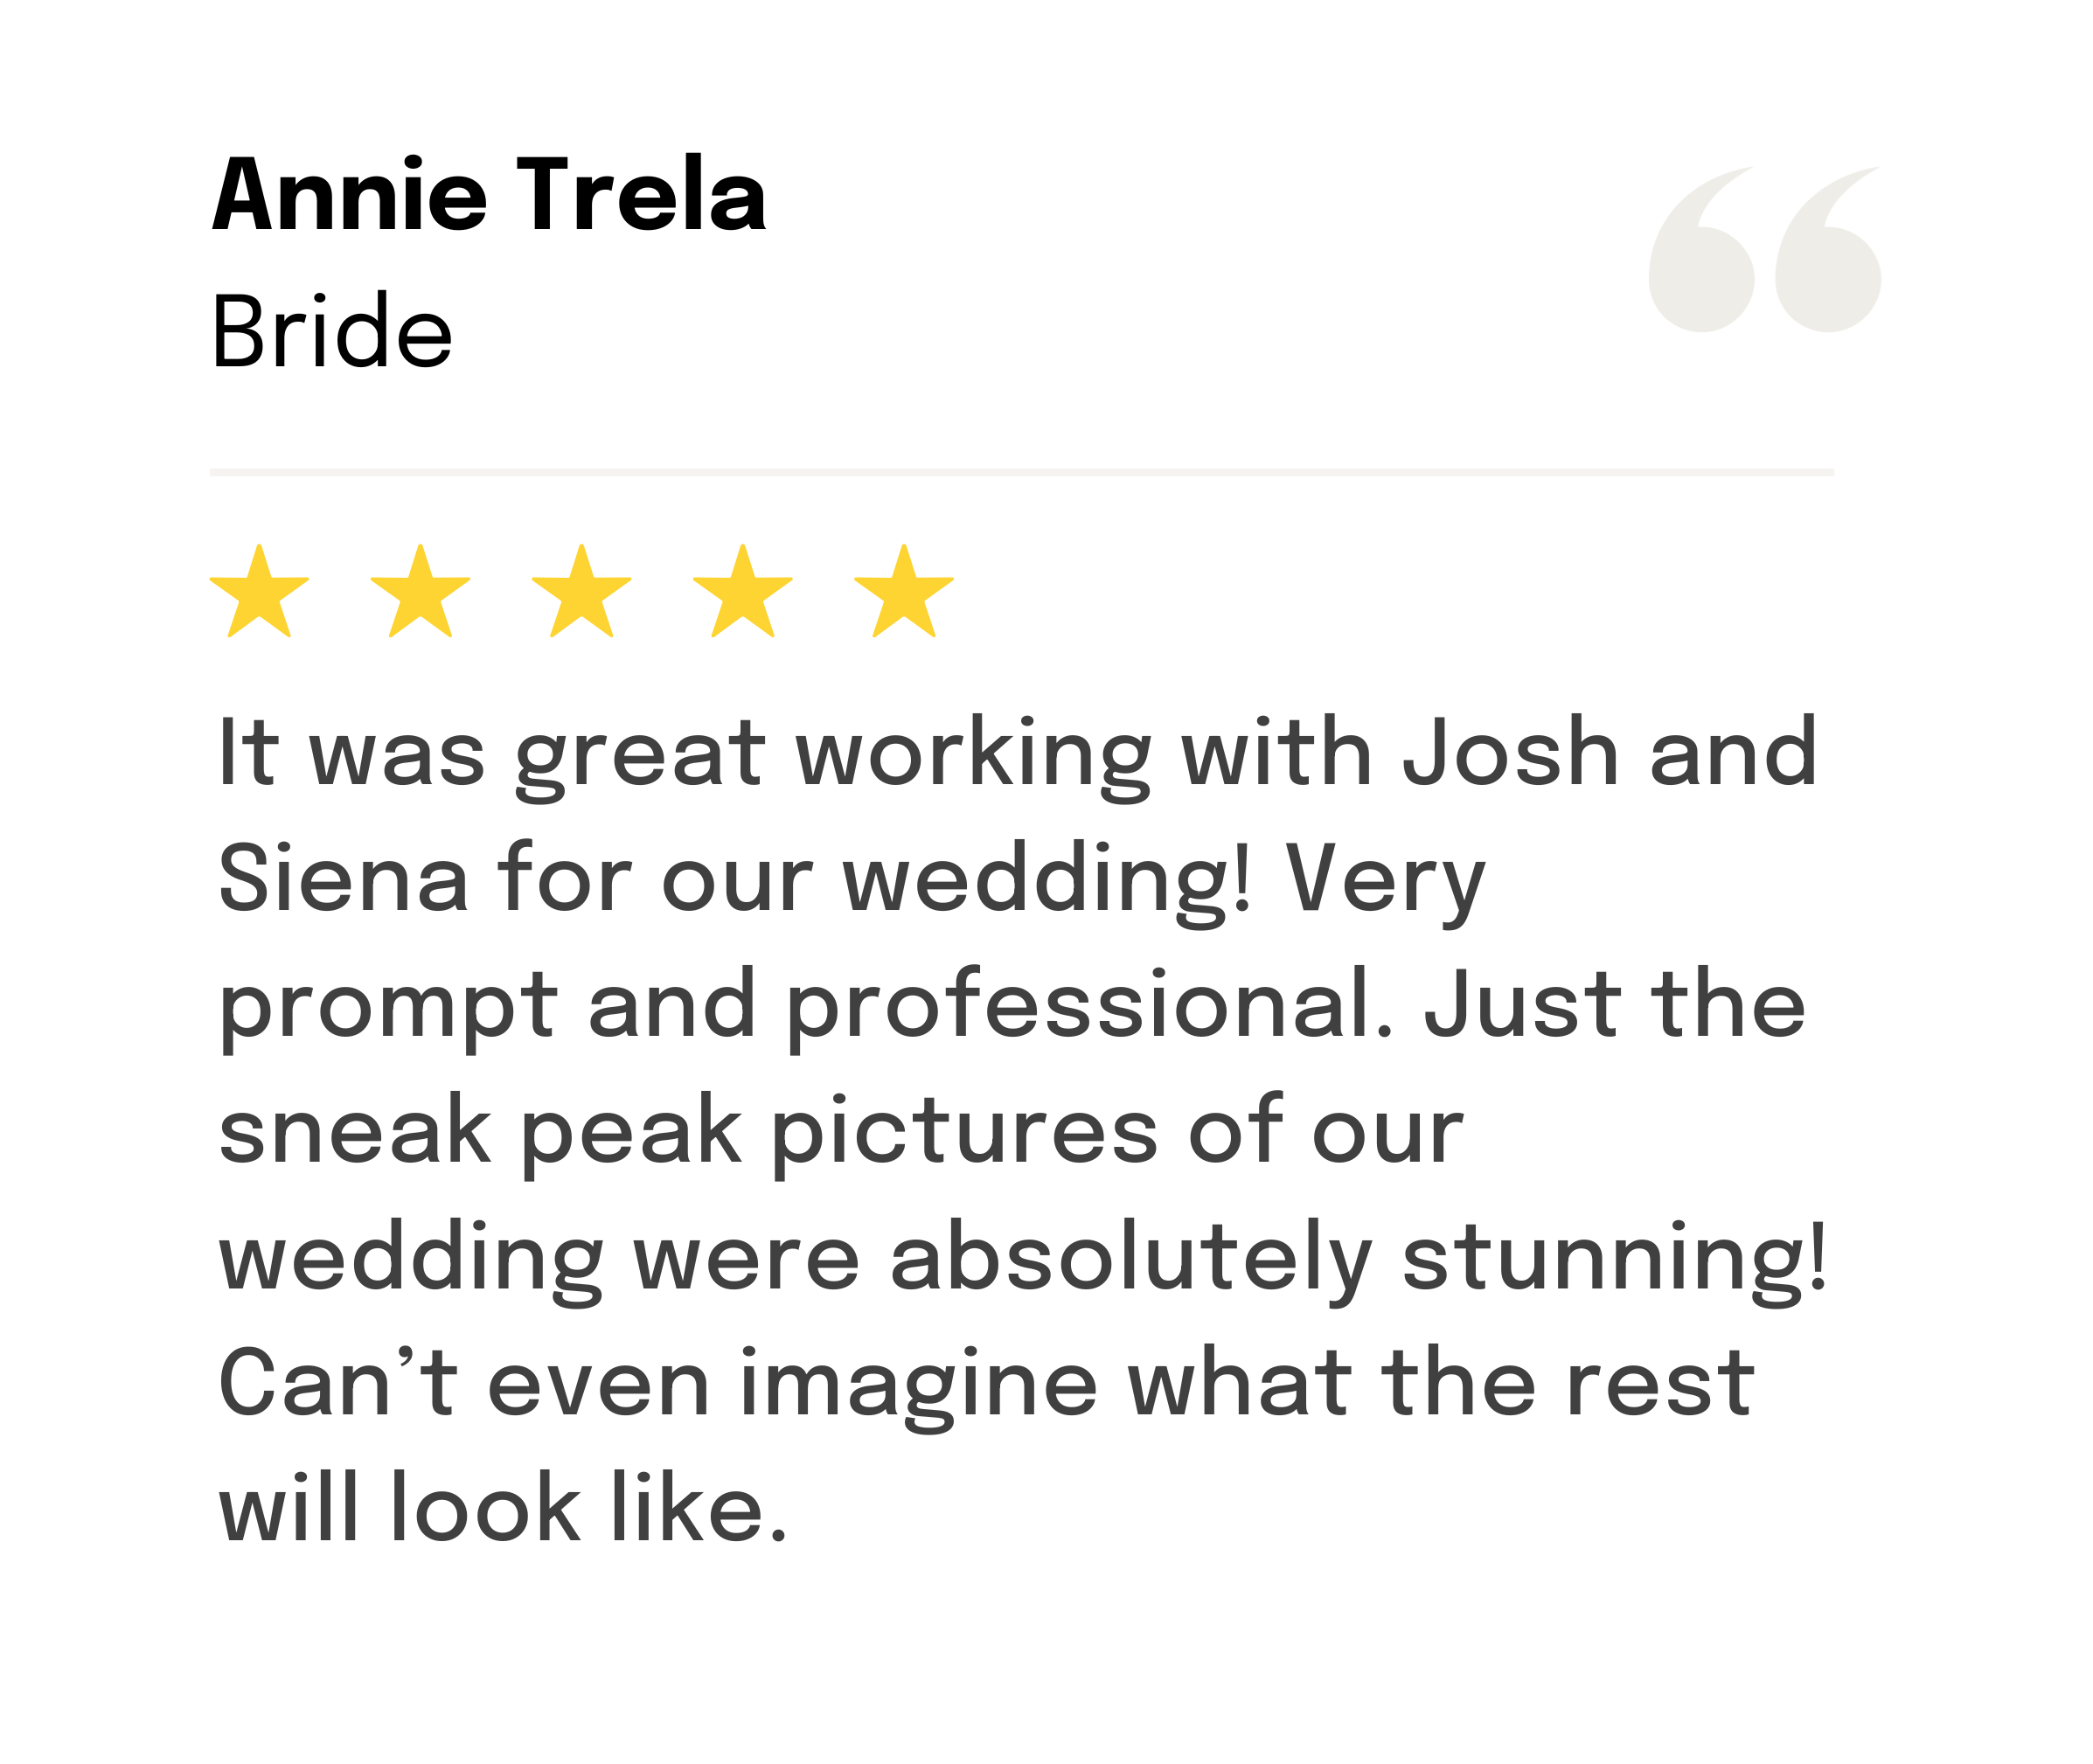 Annie writes a 5-star review to Wandr North for wedding photography services.